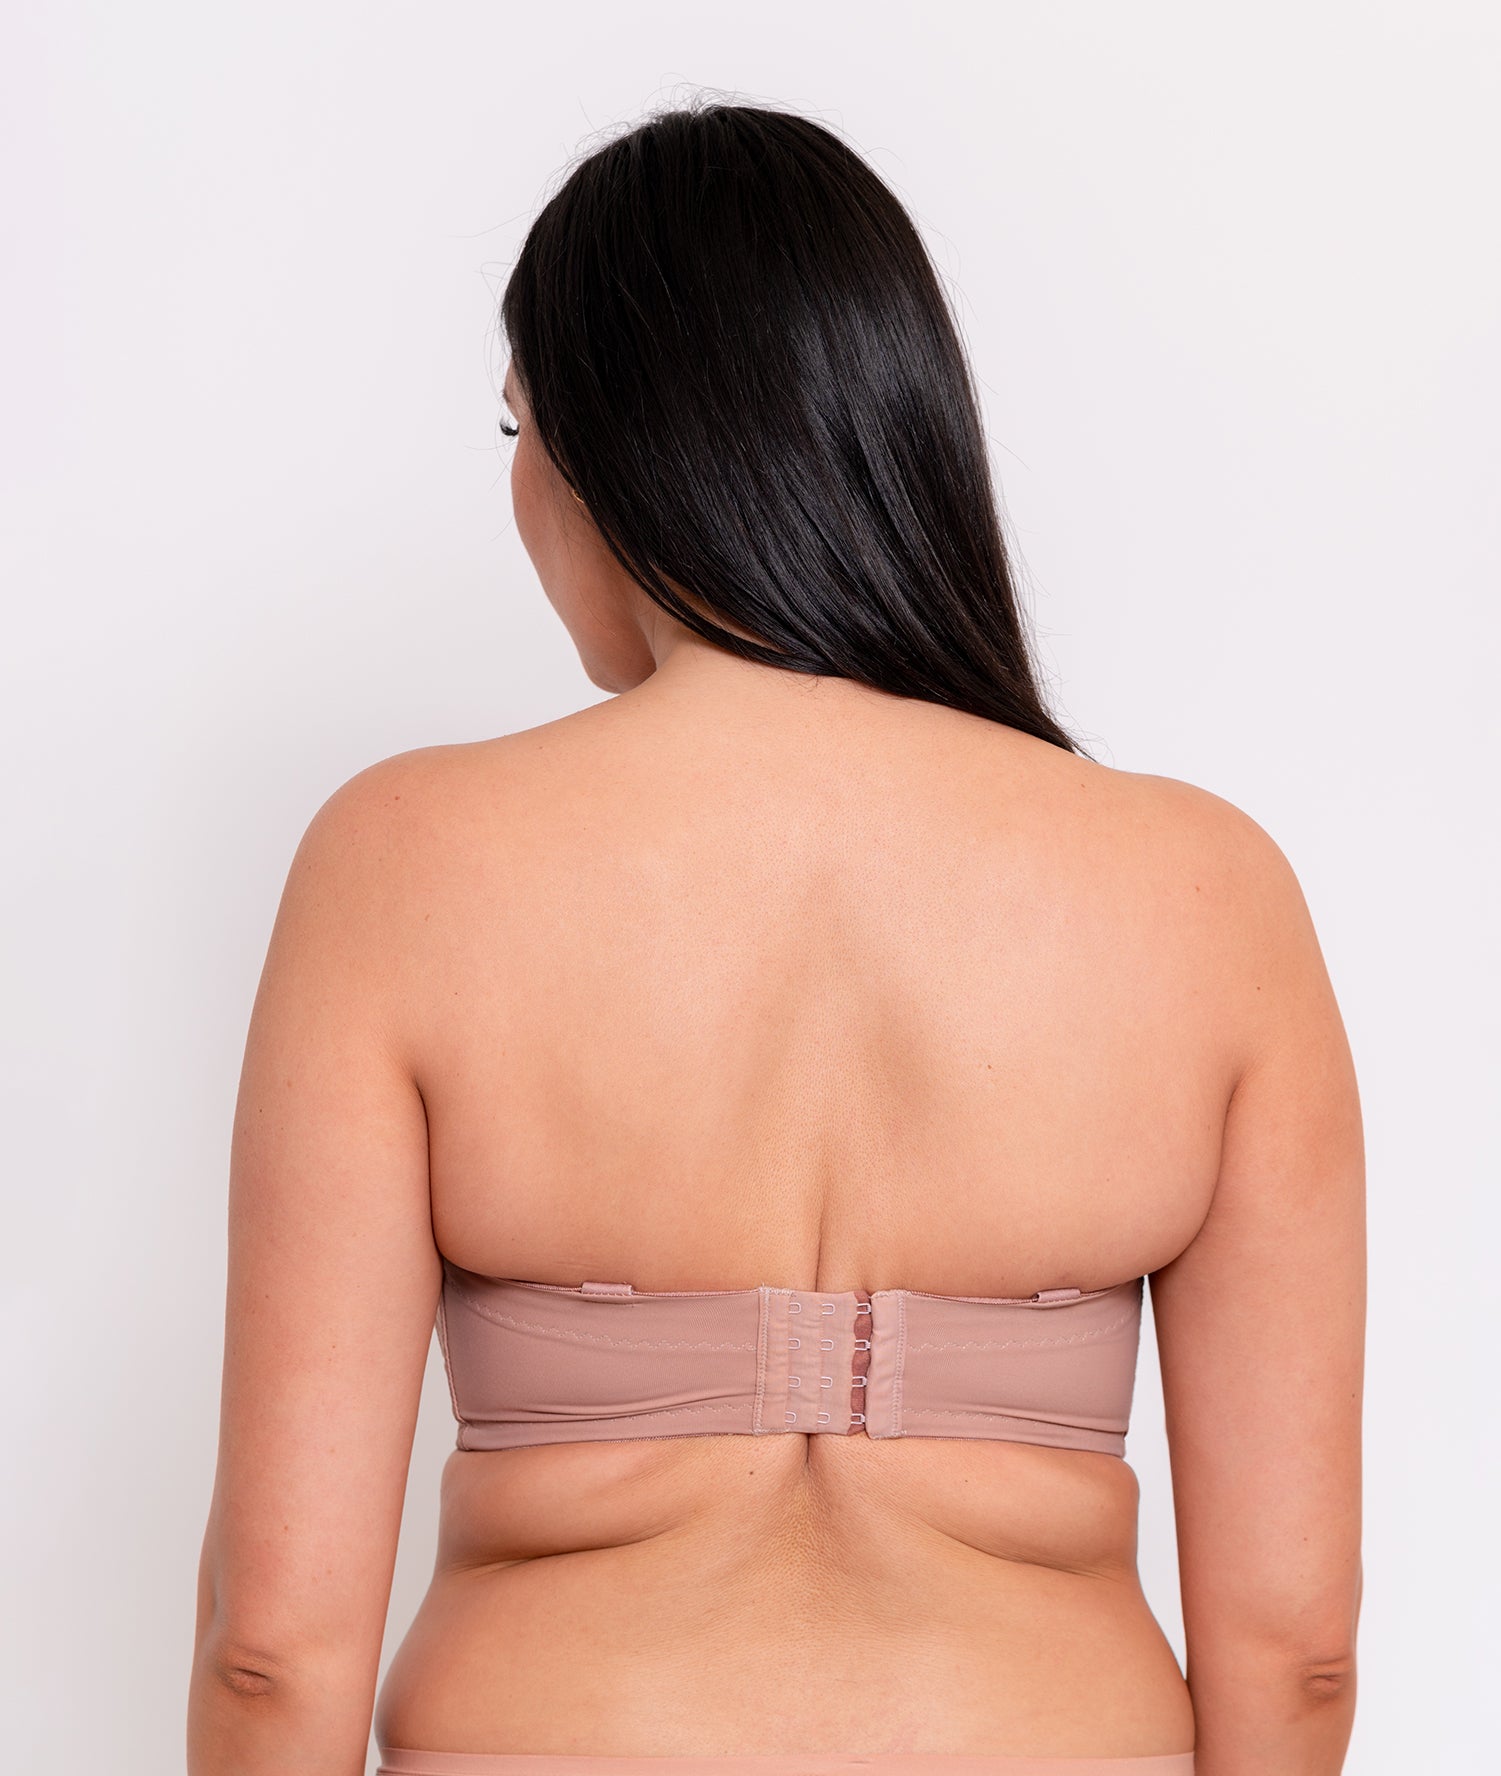 Luxe strapless – The Pencil Test